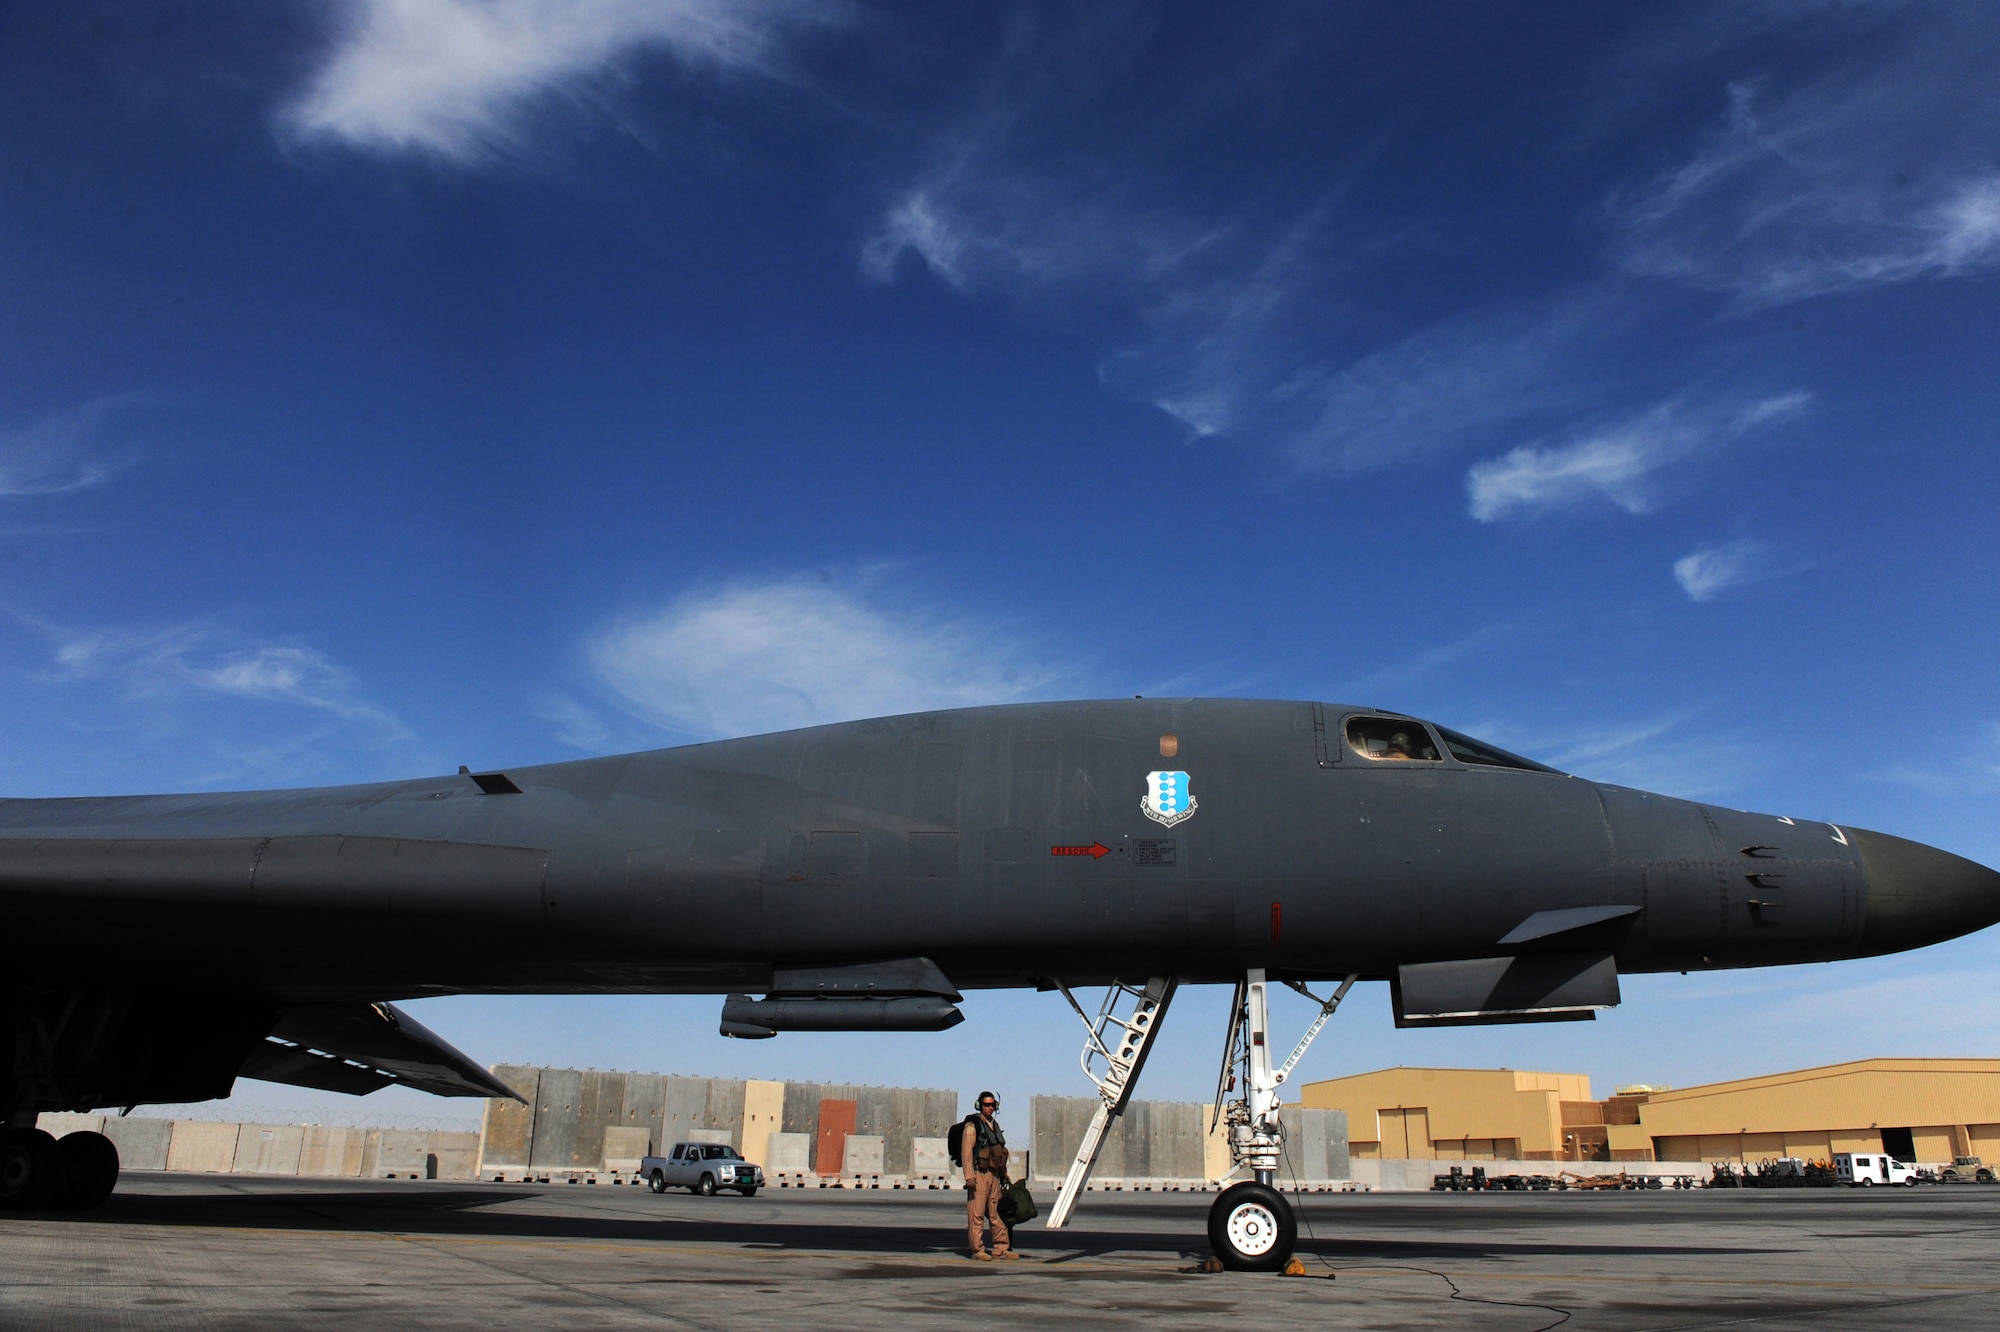 Maj. Nathan ''Gobot'' Rowan, a B-1B Lancer pilot assigned to the 37th Expeditionary Bomb Squadron, prepares to board a B-1B for the last mission of his deployment Jan. 23, 2010, in Southwest Asia. (U.S. Air Force photo/Staff Sgt. Manuel J. Martinez/Released)